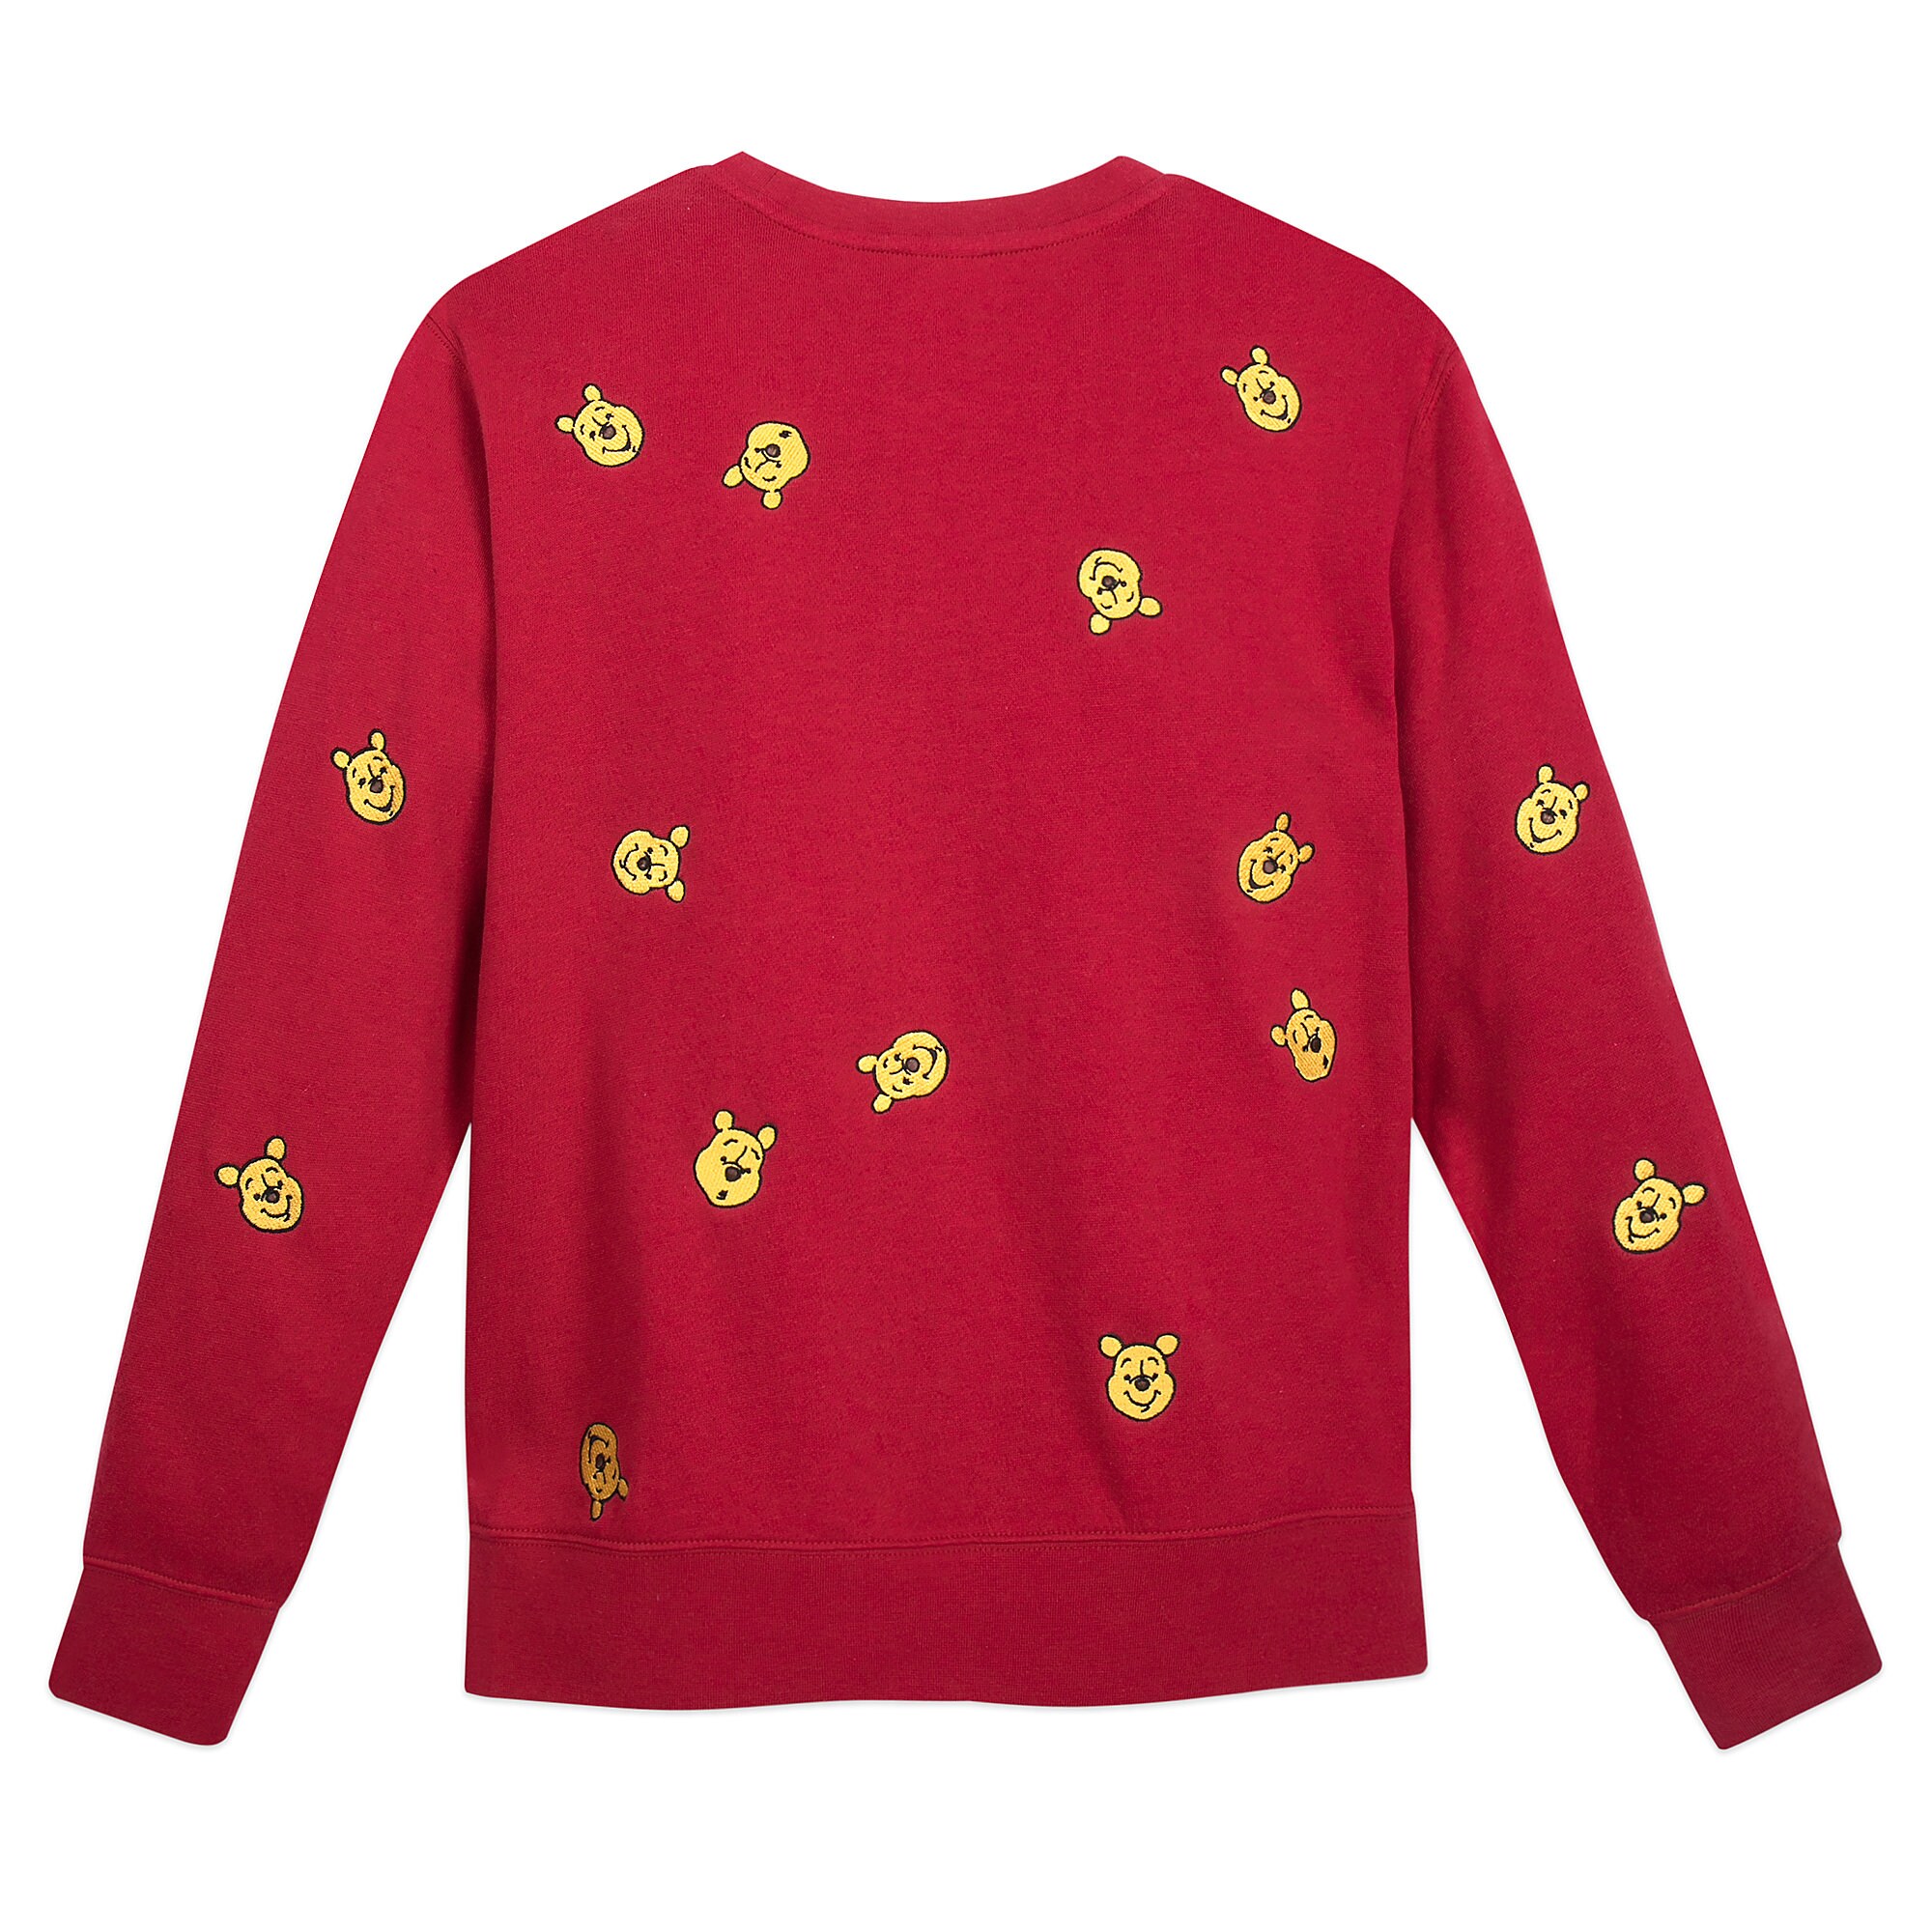 Winnie the Pooh Pullover Sweater for Adults now available for purchase ...